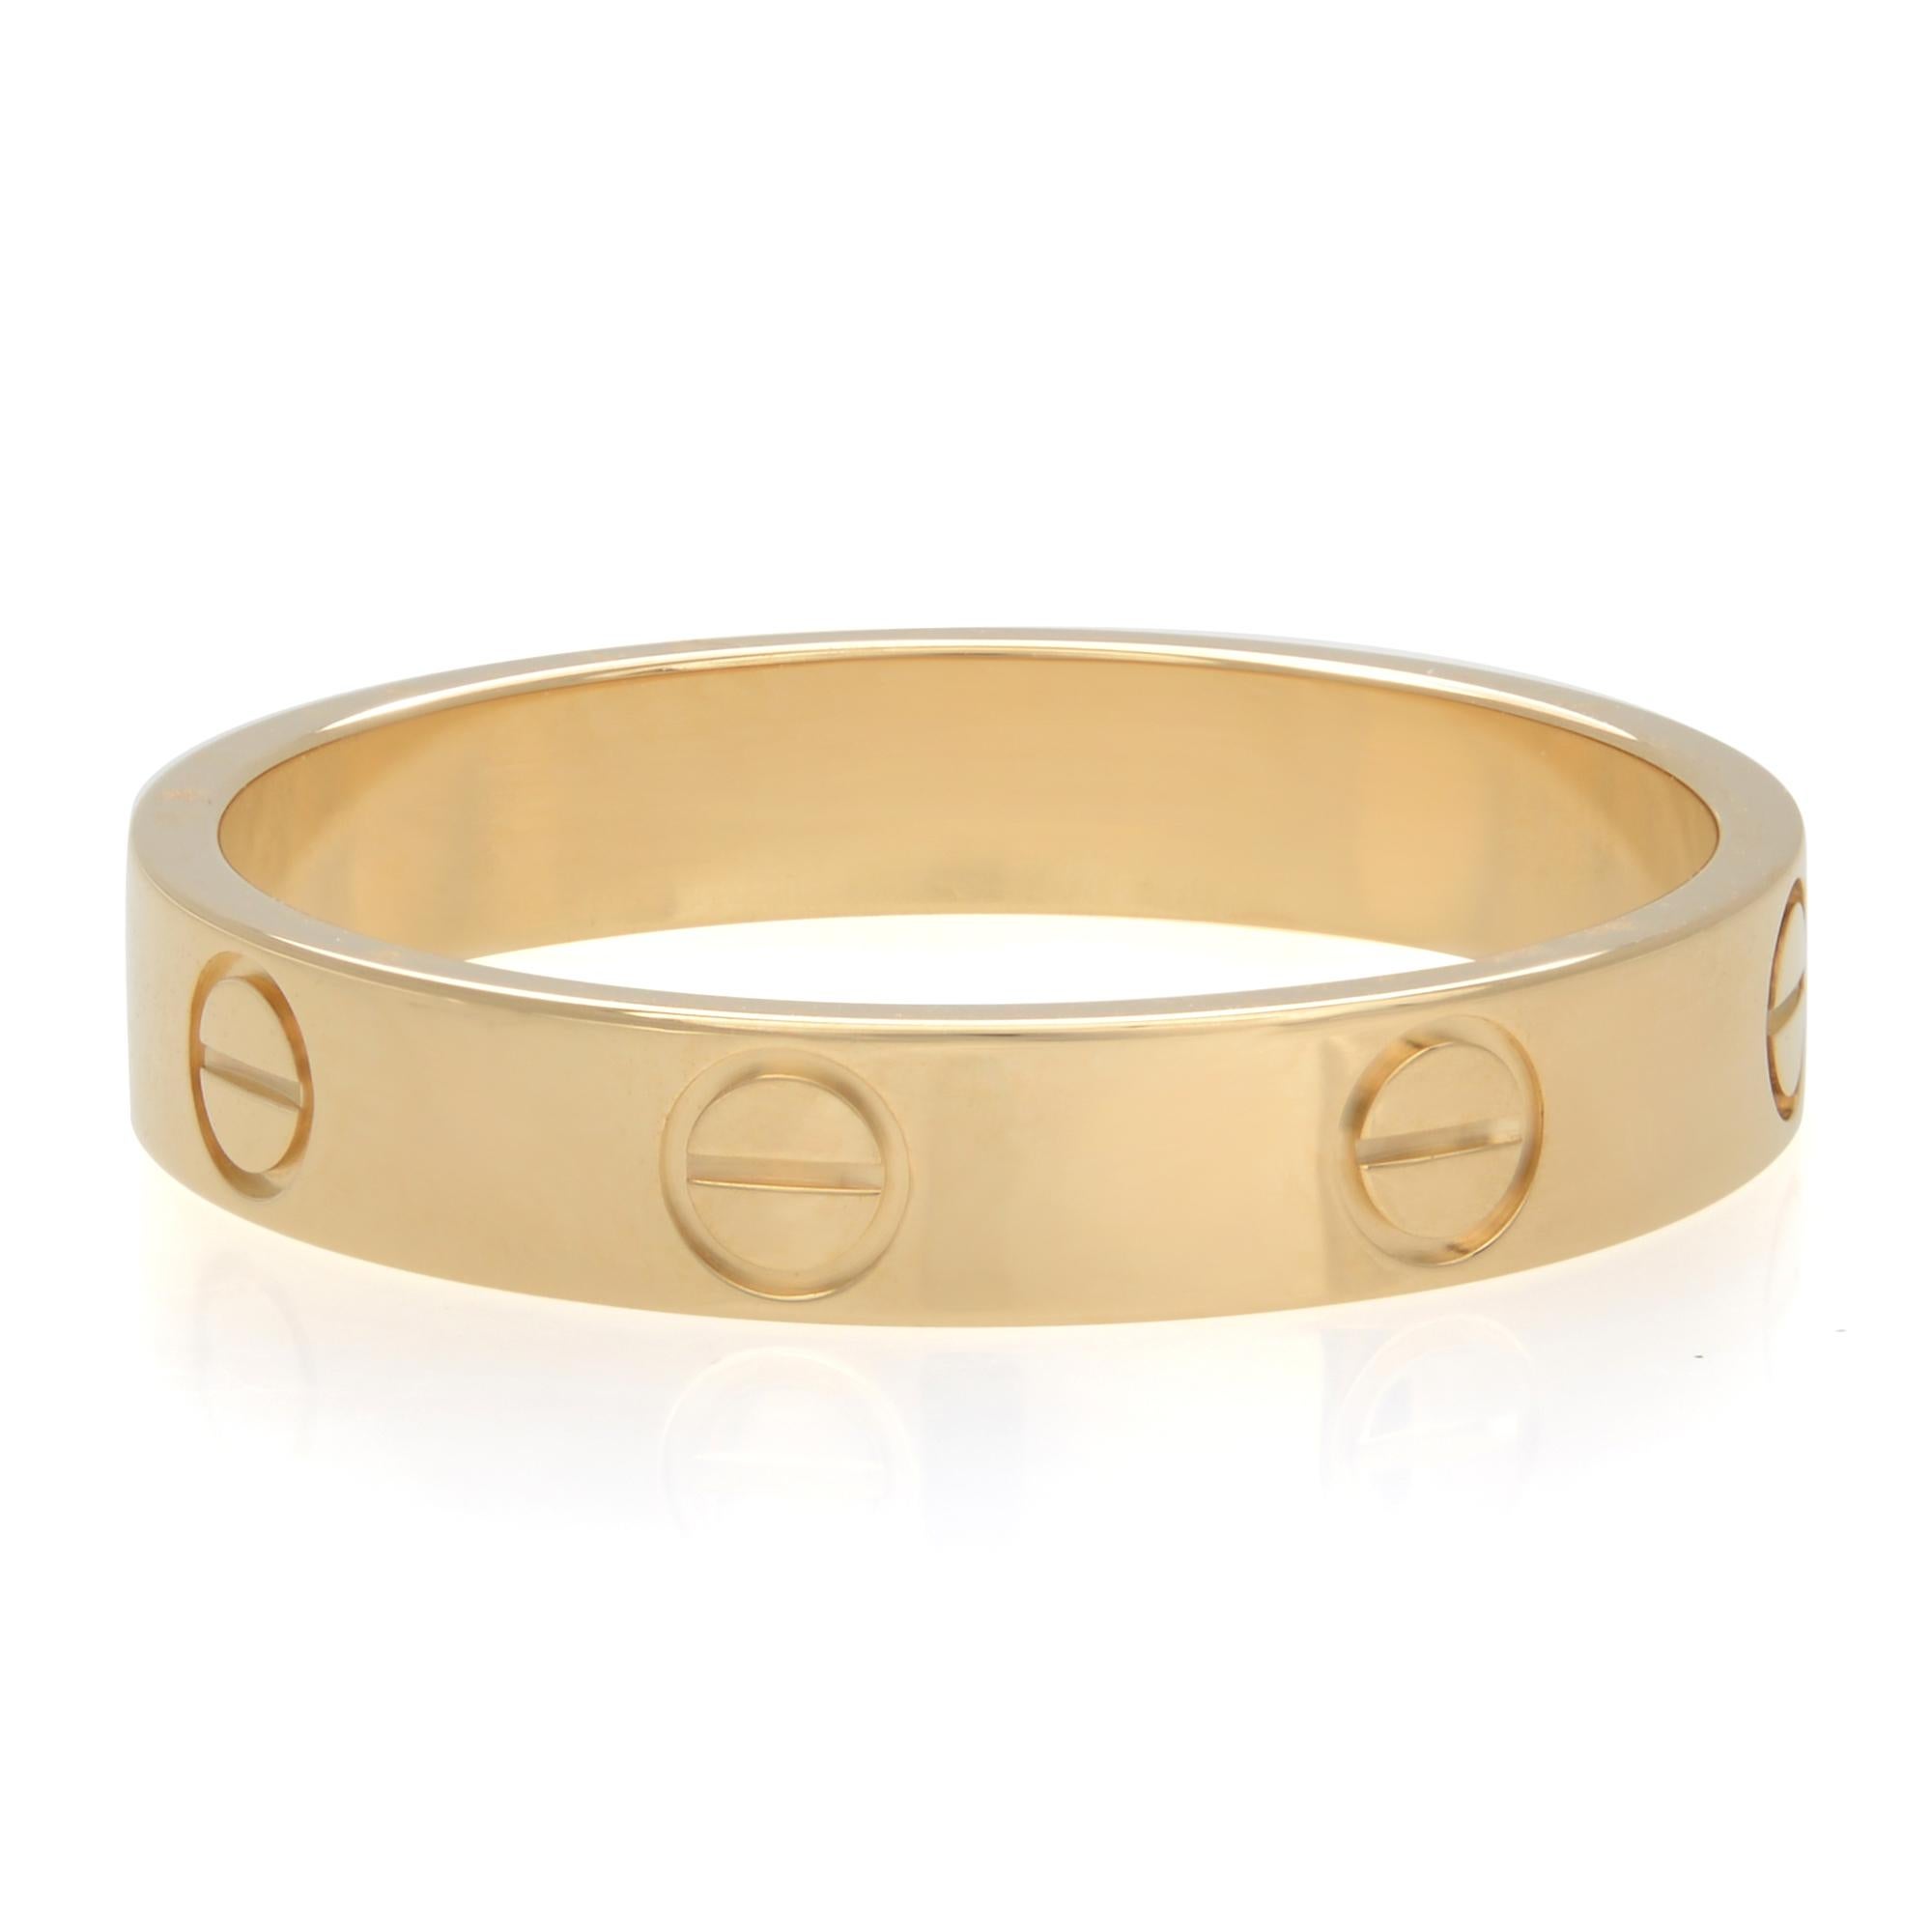 Cartier Love wedding band in 18K yellow gold. Small model Love ring. Width: 3.6mm. Ring size 56 US 9.75. Excellent pre-owned condition. Comes with box and papers. 